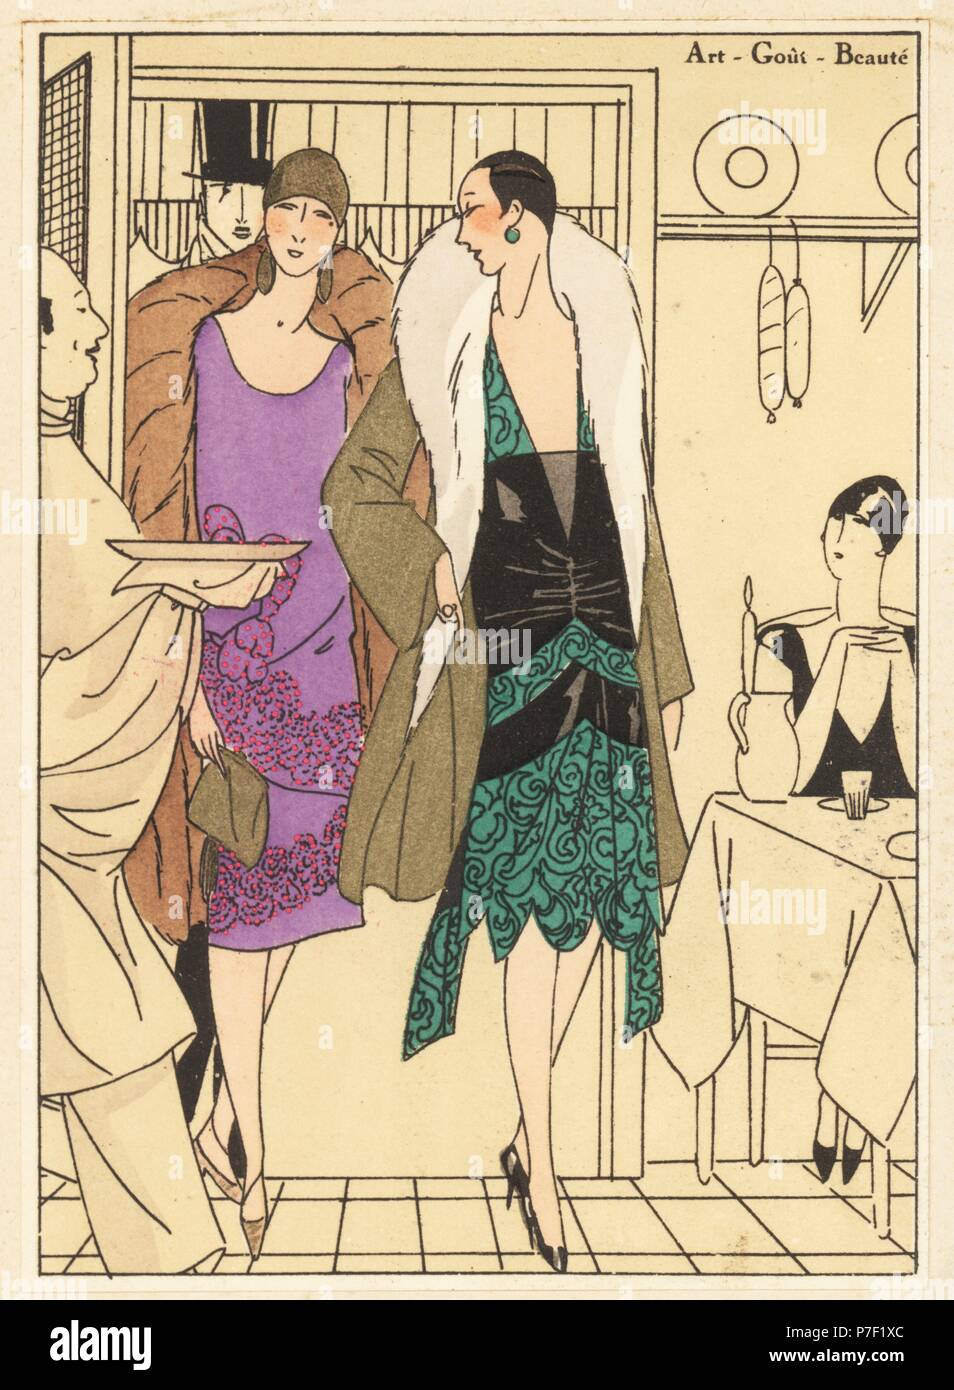 Women entering a restaurant wearing coats and evening dresses in violet muslin embroidered with flowers, and black crepe de chine with green lace. Handcolored pochoir (stencil) lithograph from the French luxury fashion magazine Art, Gout, Beaute, 1926. Stock Photo